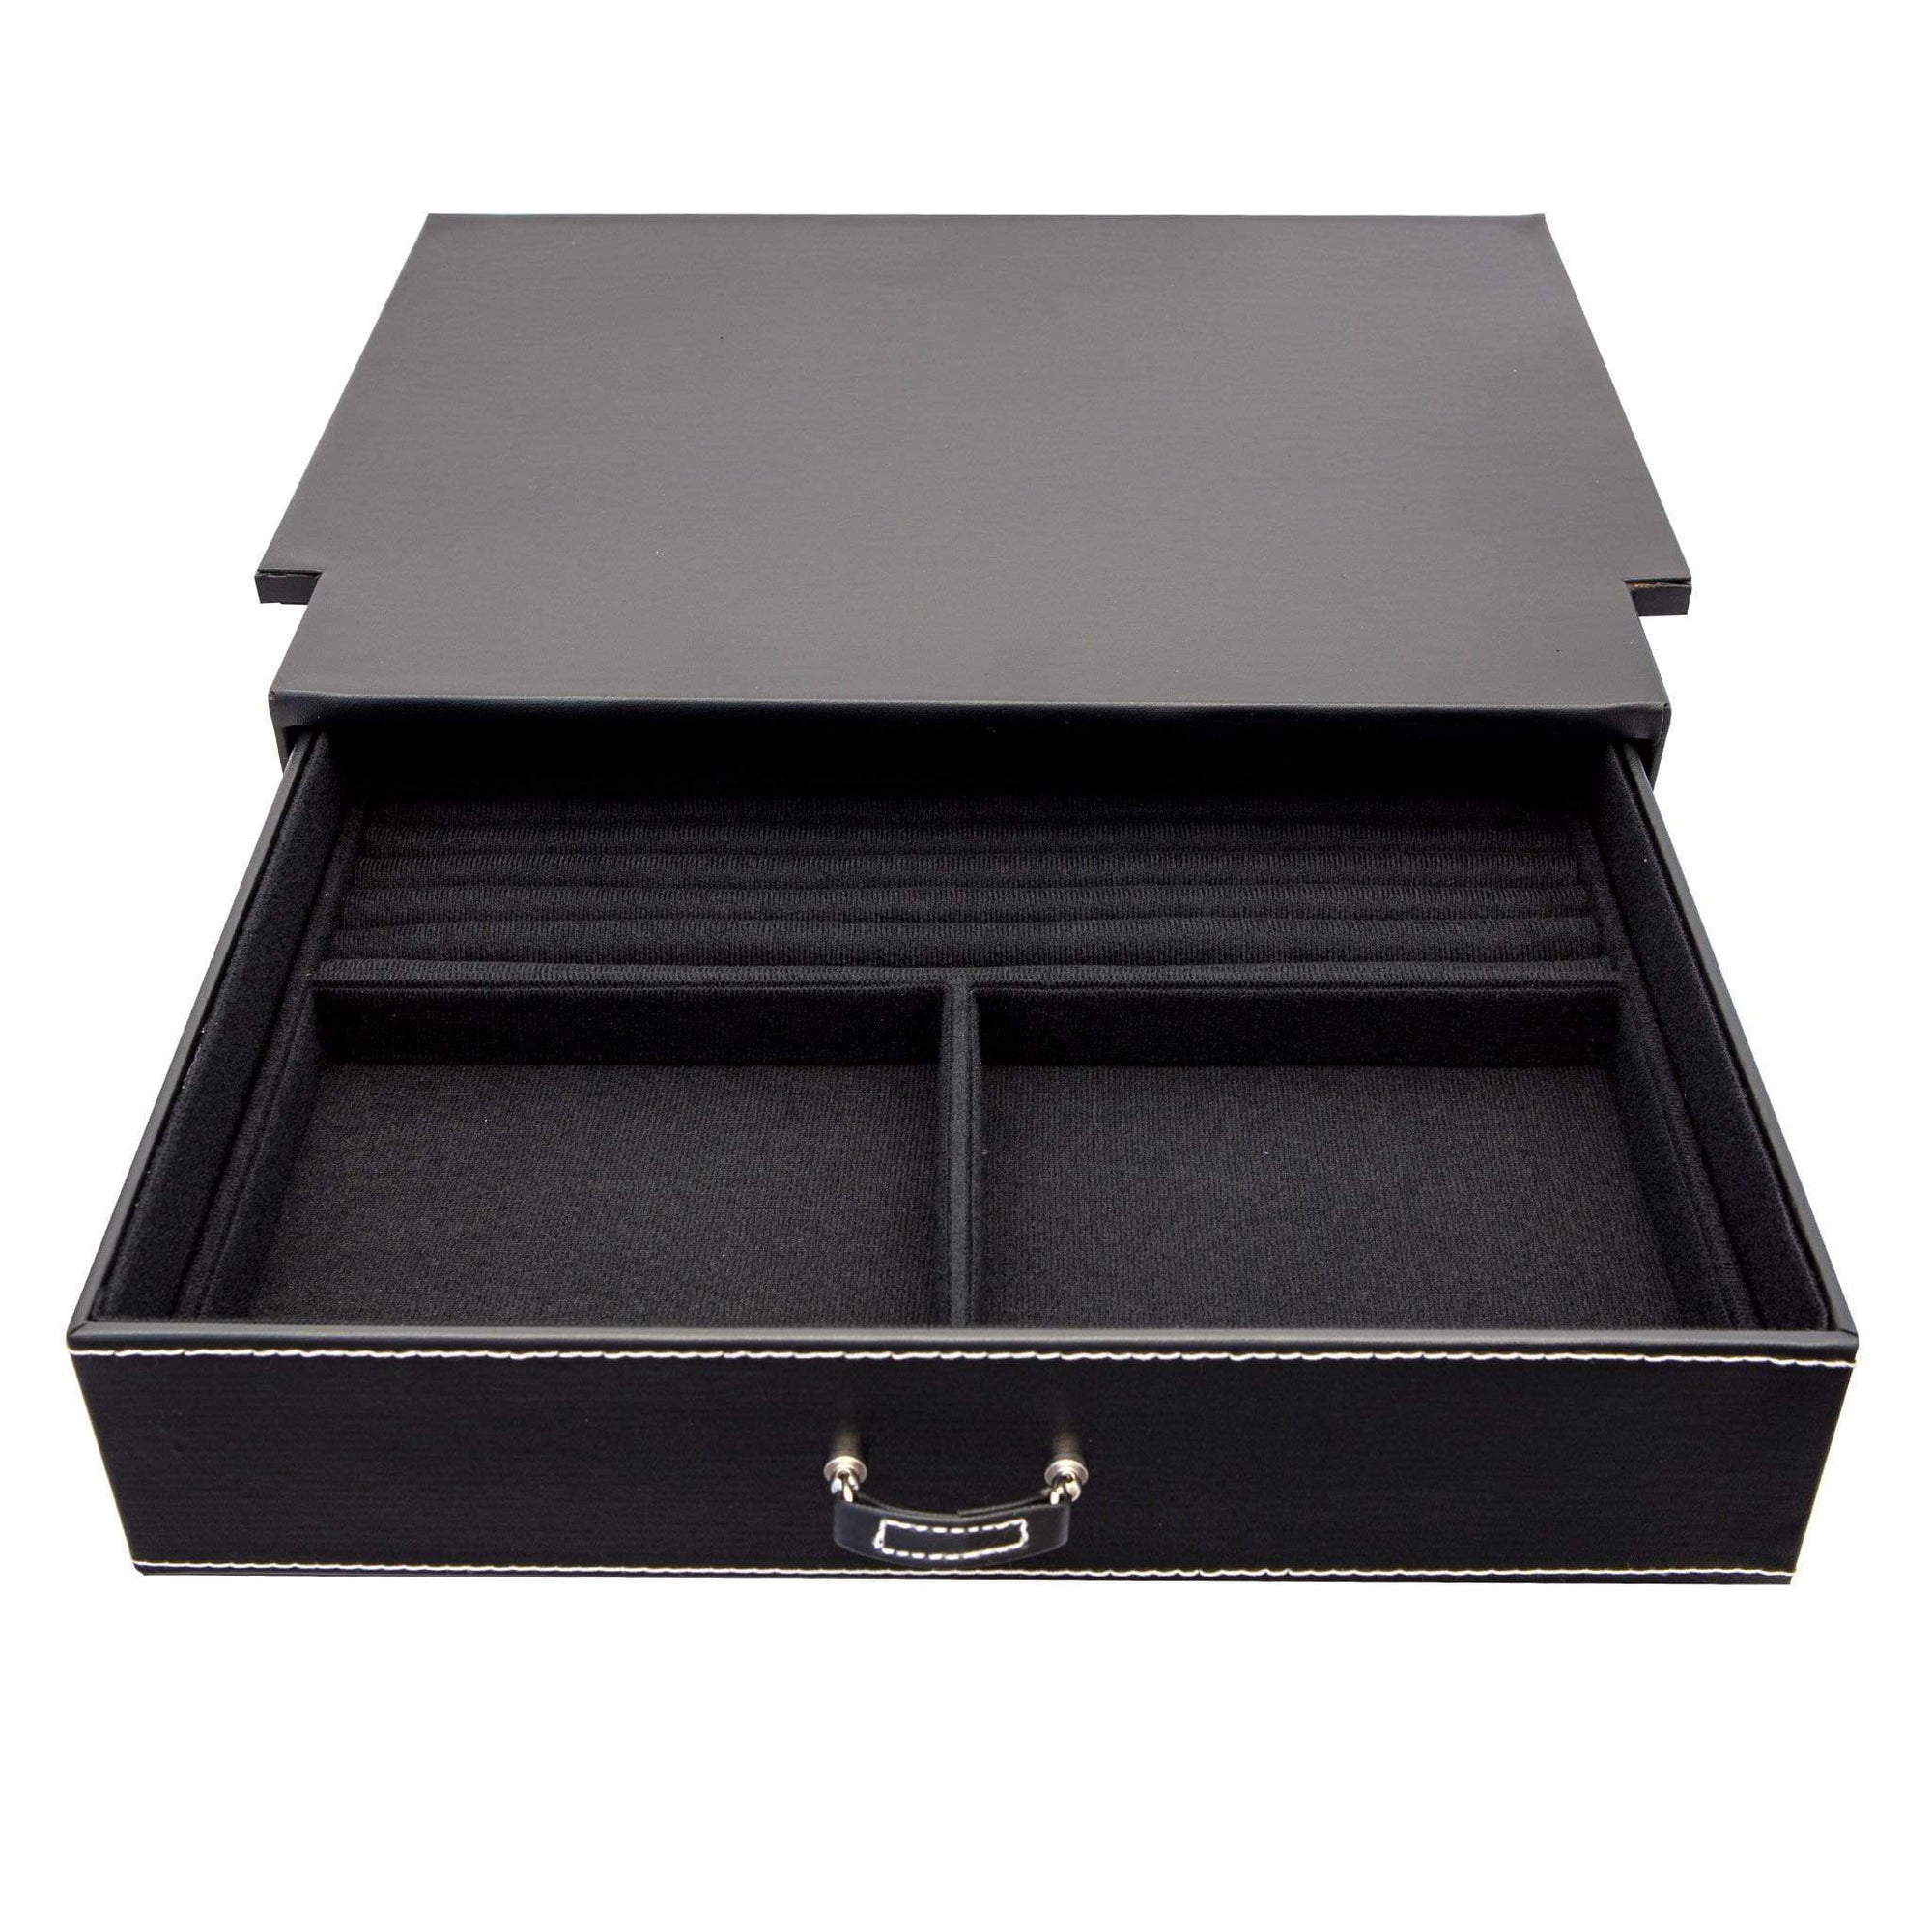 Accessory - Storage - Jewelry Drawer - 15 inch - under shelf mount - 50 size safes | Liberty Safe Norcal.